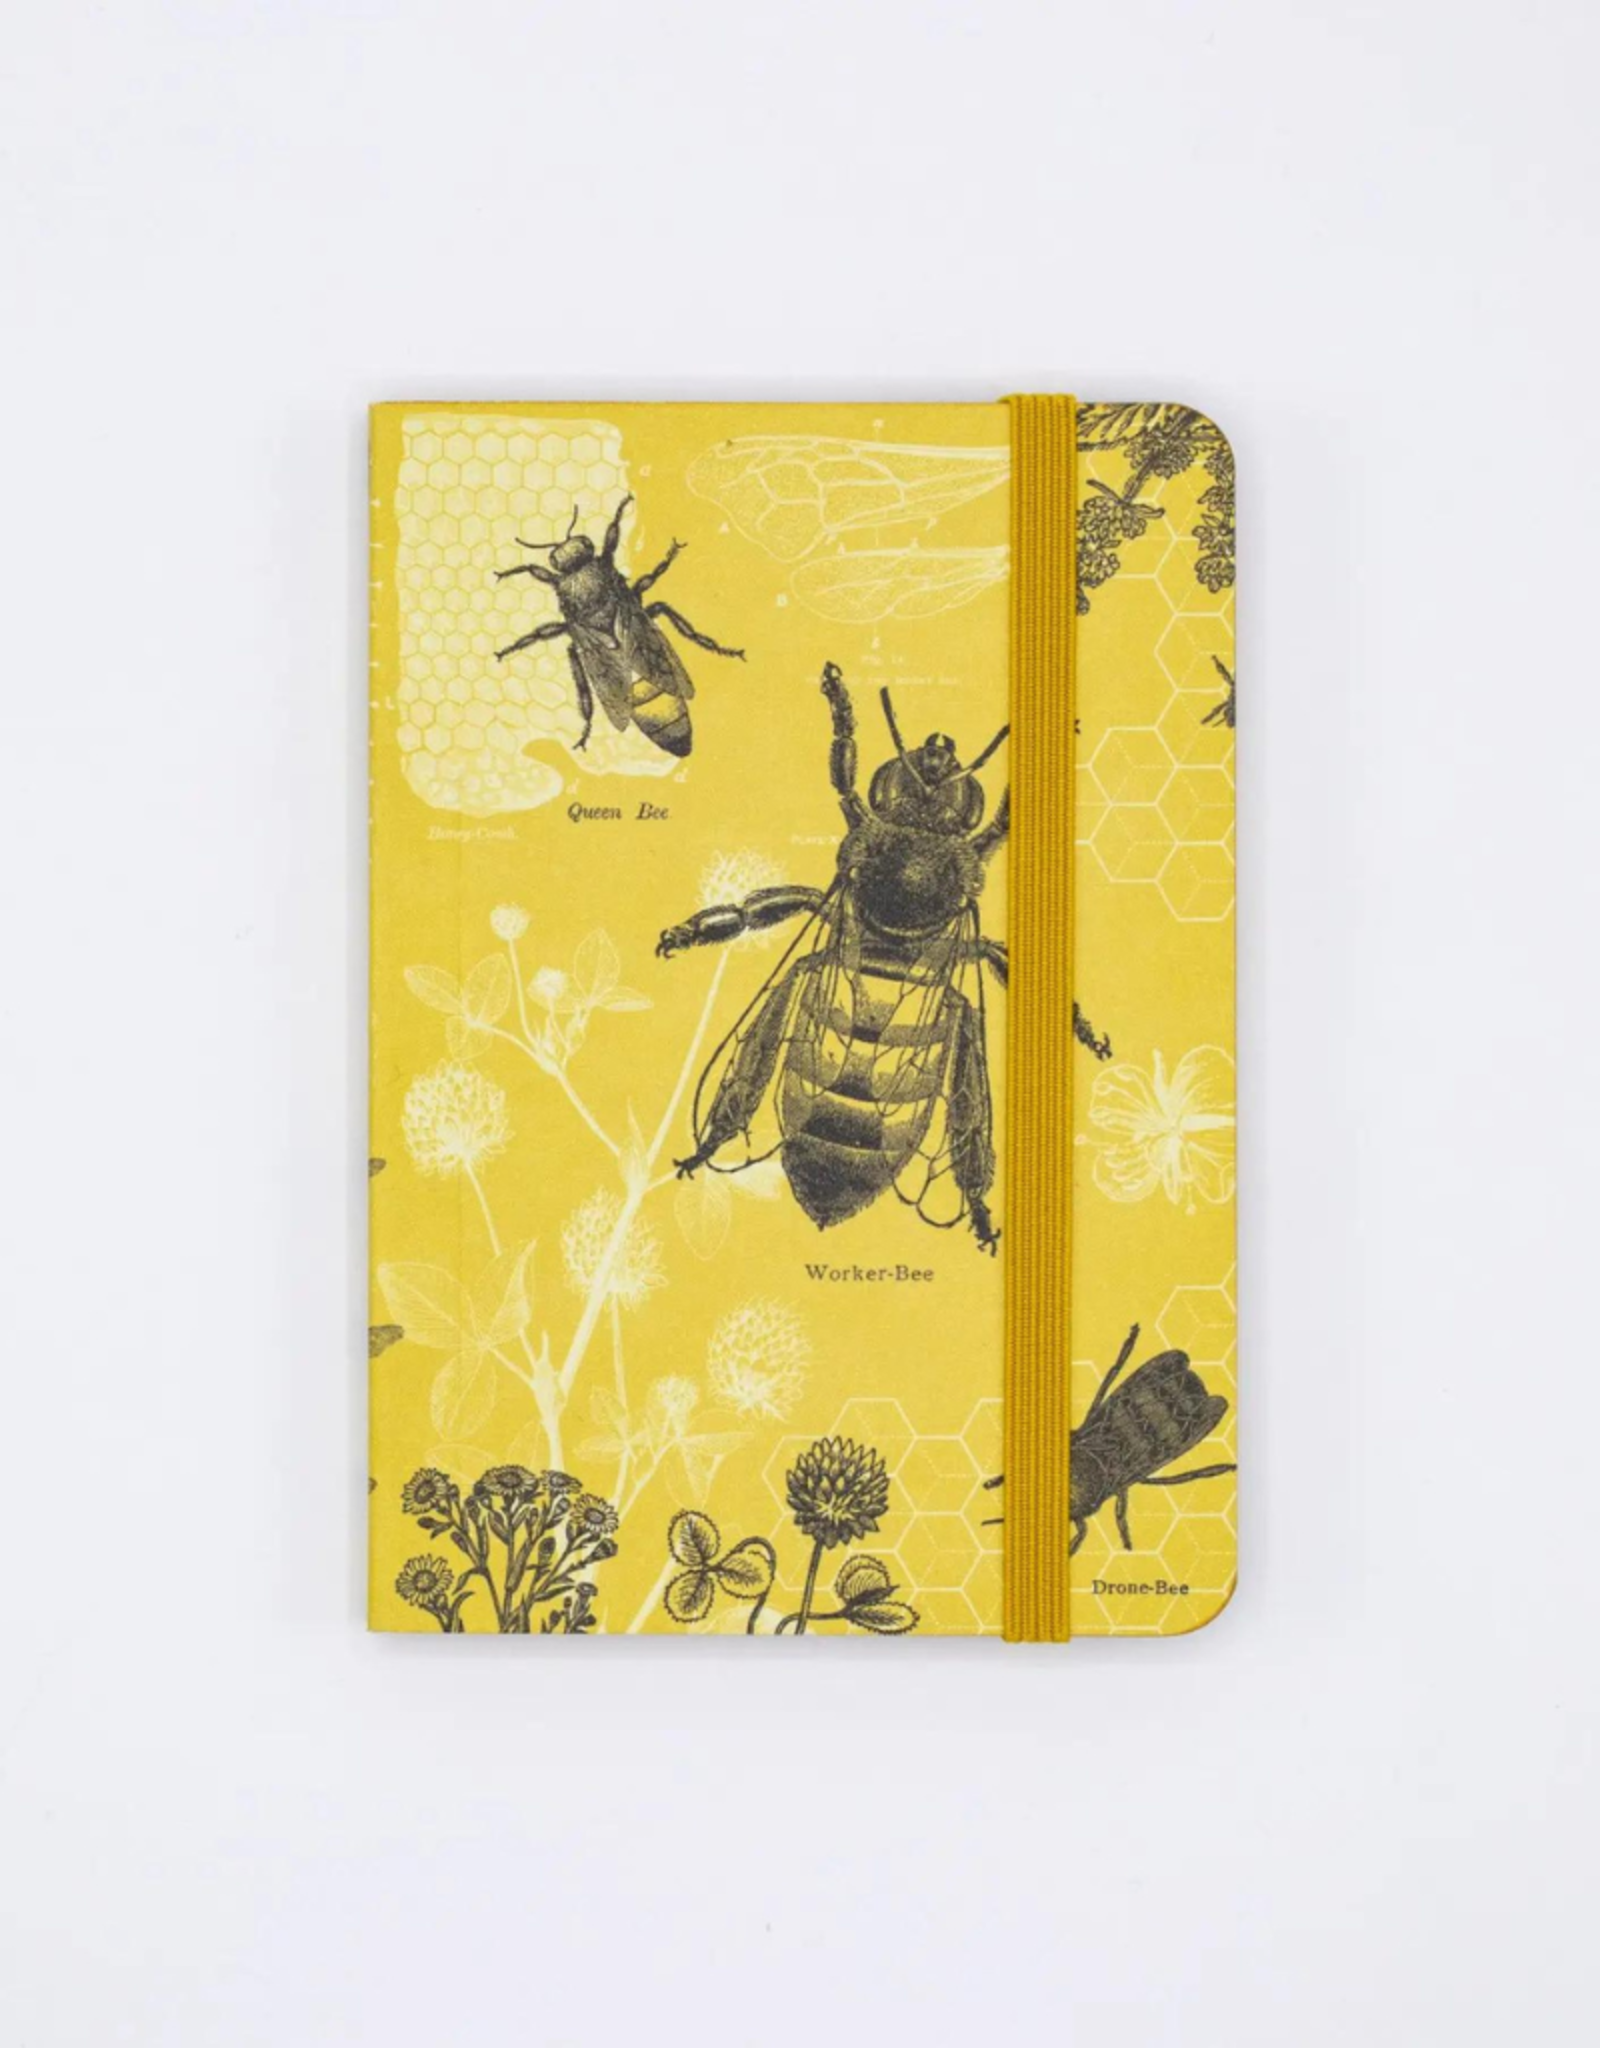 NOTEBOOK-HONEY BEE OBSERVATION SOFTCOVER